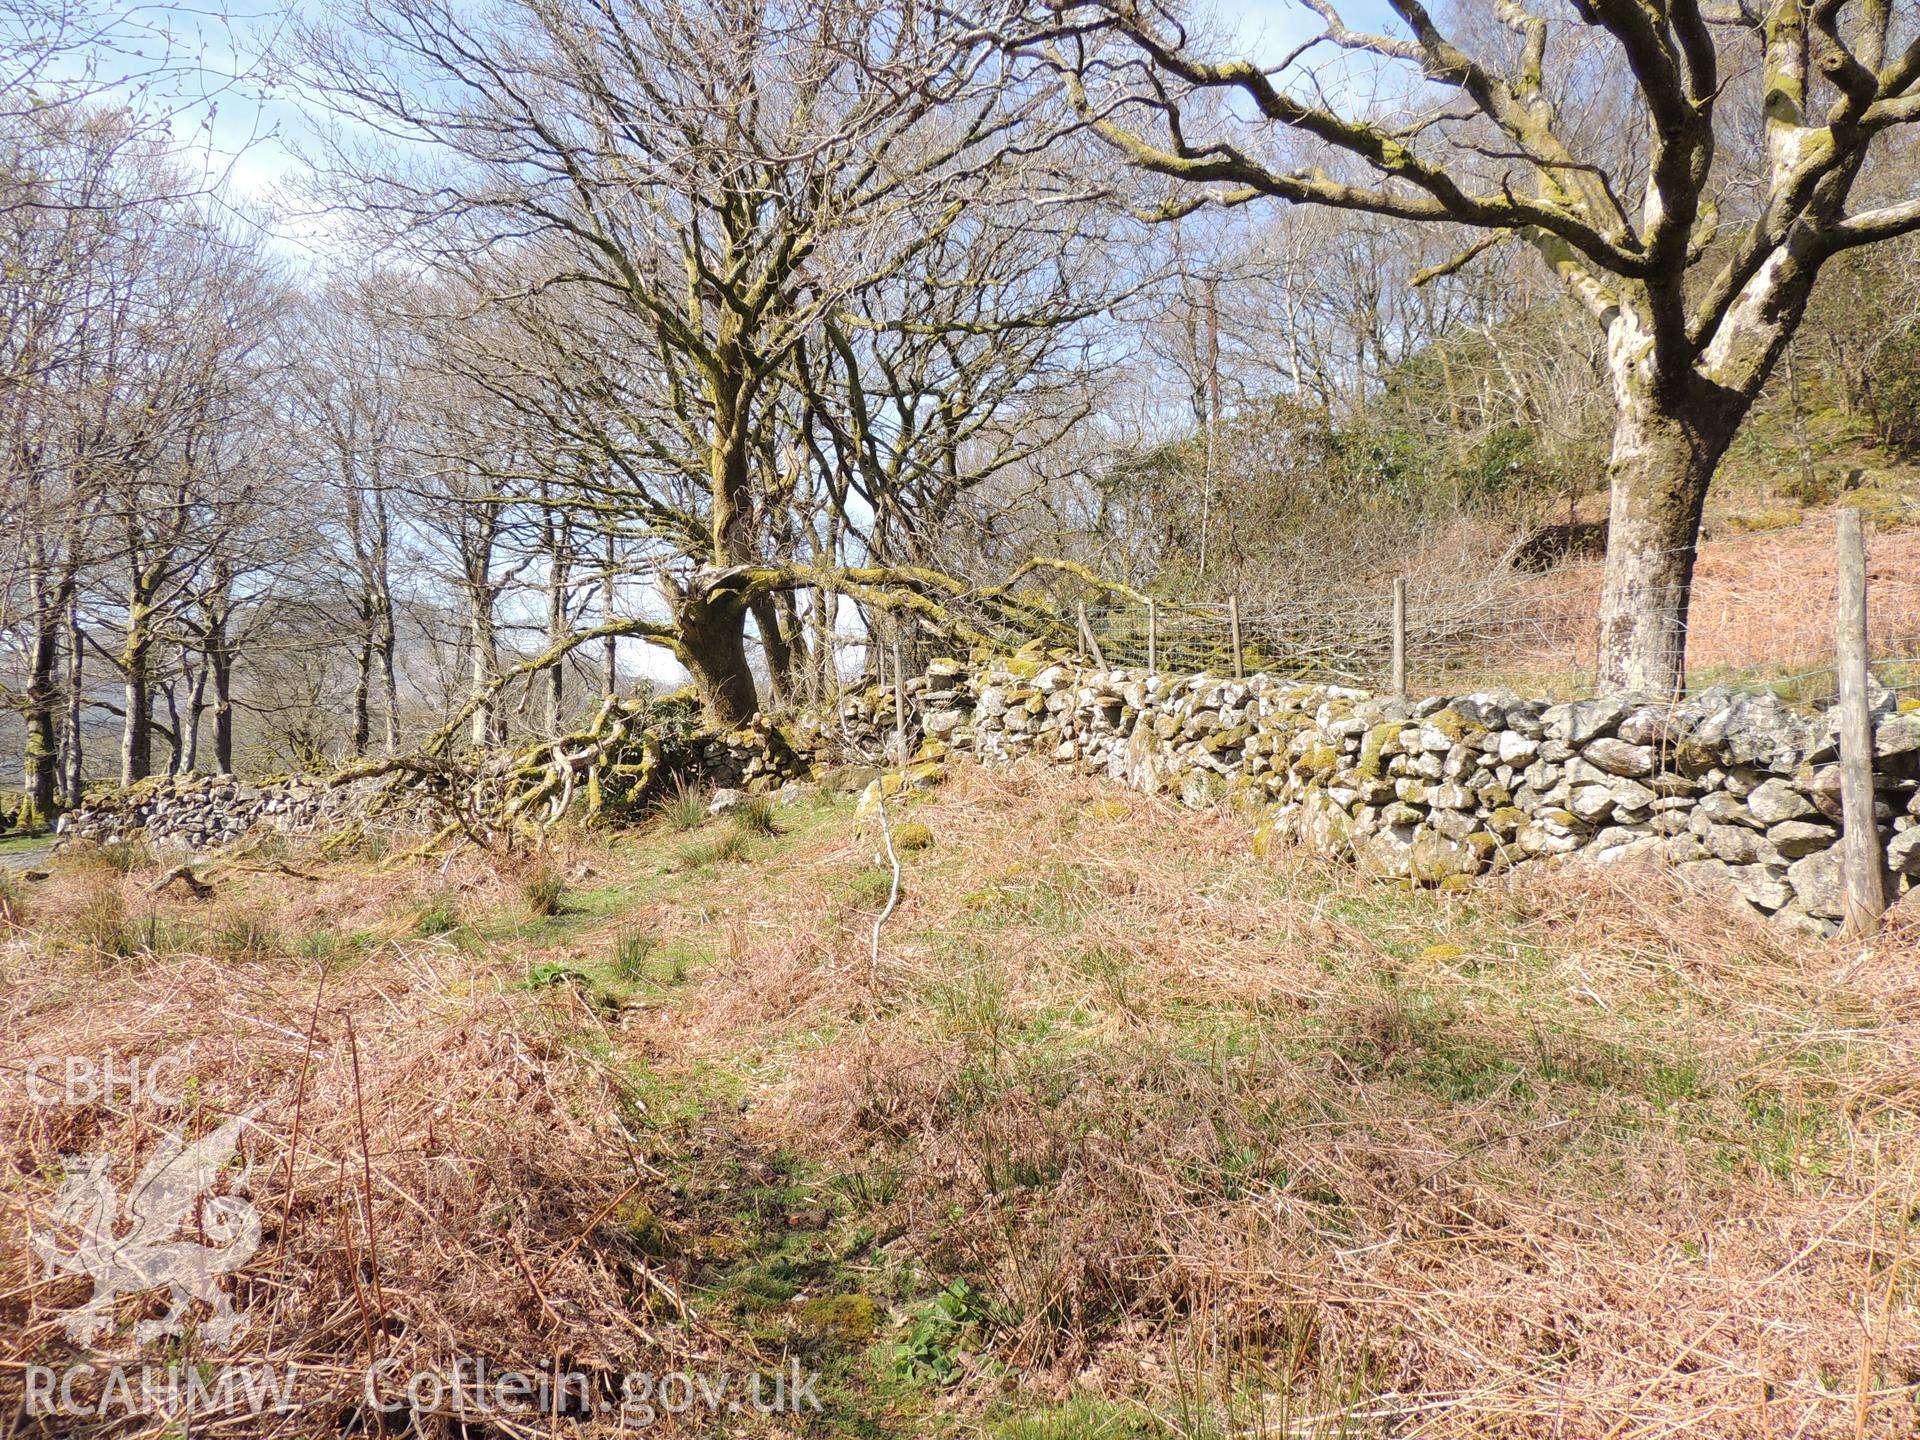 'View toward west from c. SH62447 44123.' Photographed as part of desk based assessment and heritage impact assessment of a hydro scheme on the Afon Croesor, Brondanw Estate, Gwynedd. Produced by Archaeology Wales for Renewables First Ltd. 2018.